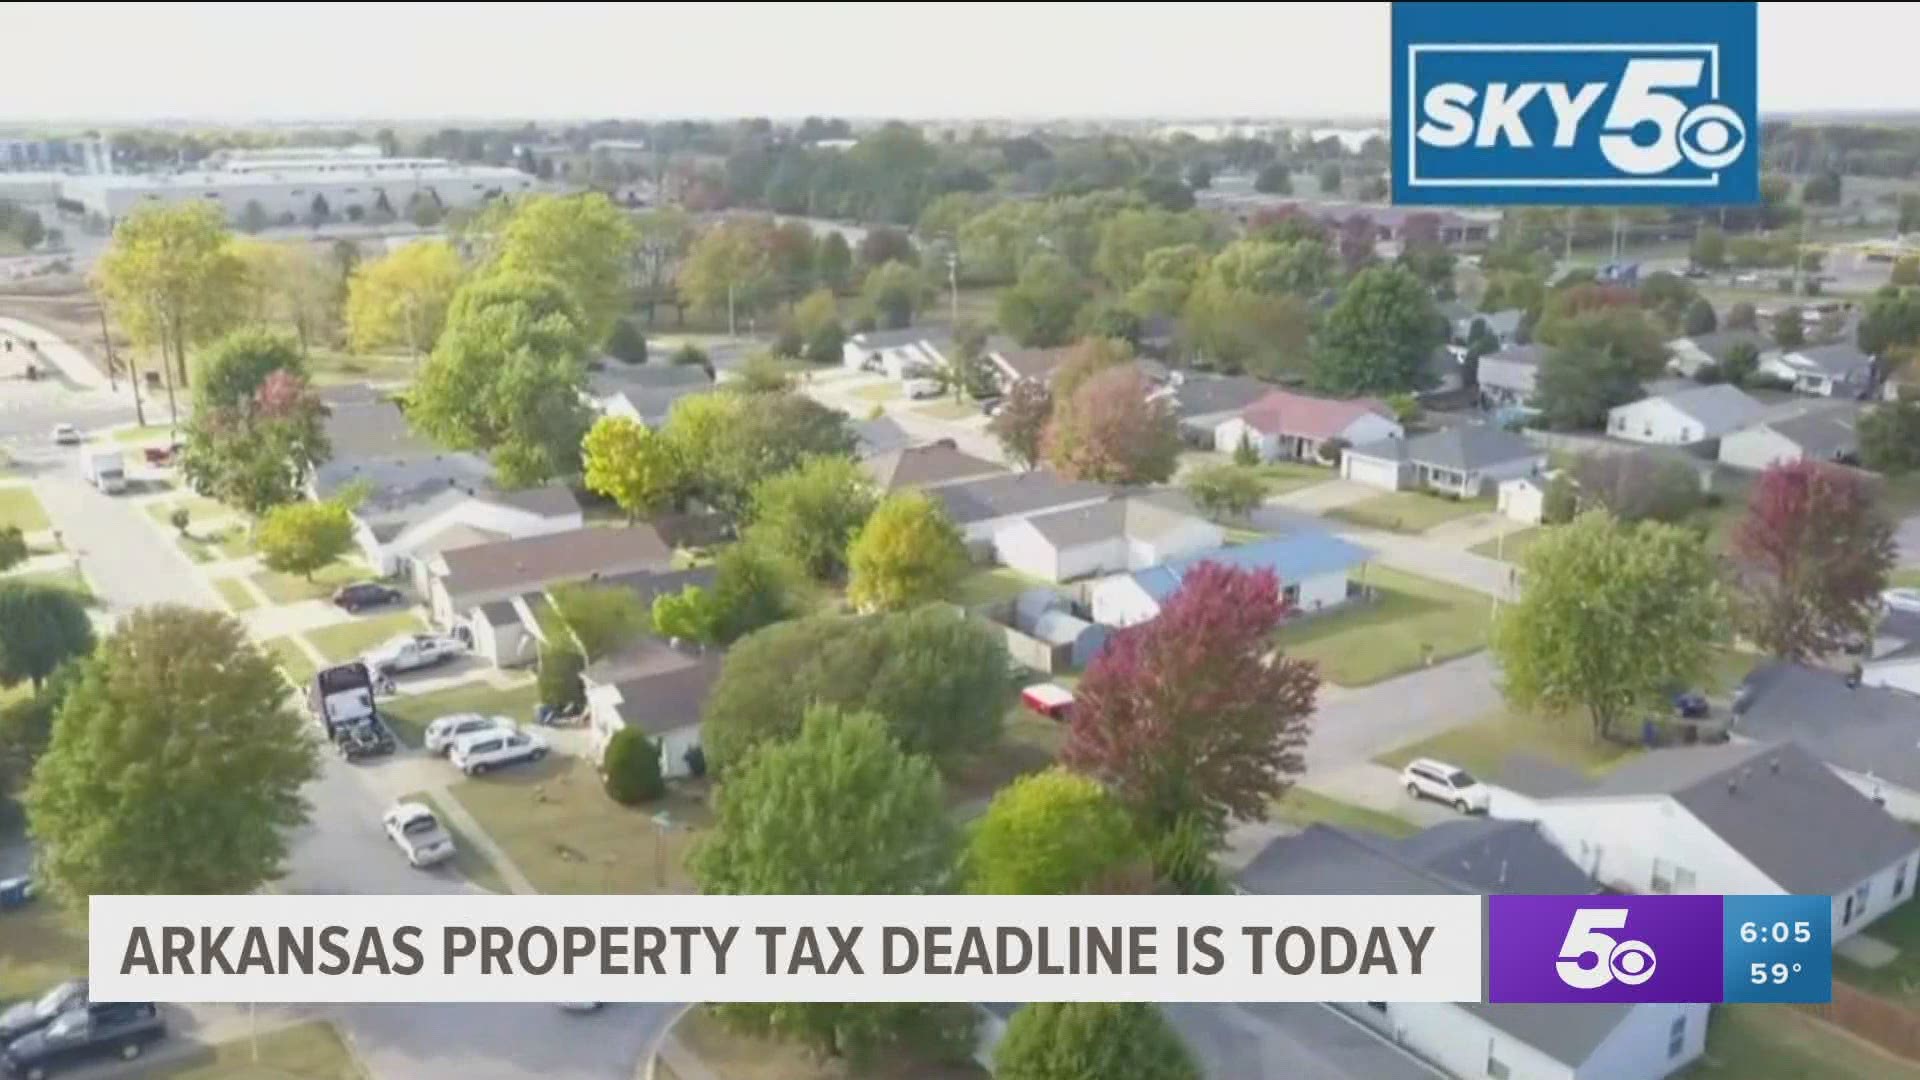 Deadline to pay property taxes is today in Arkansas